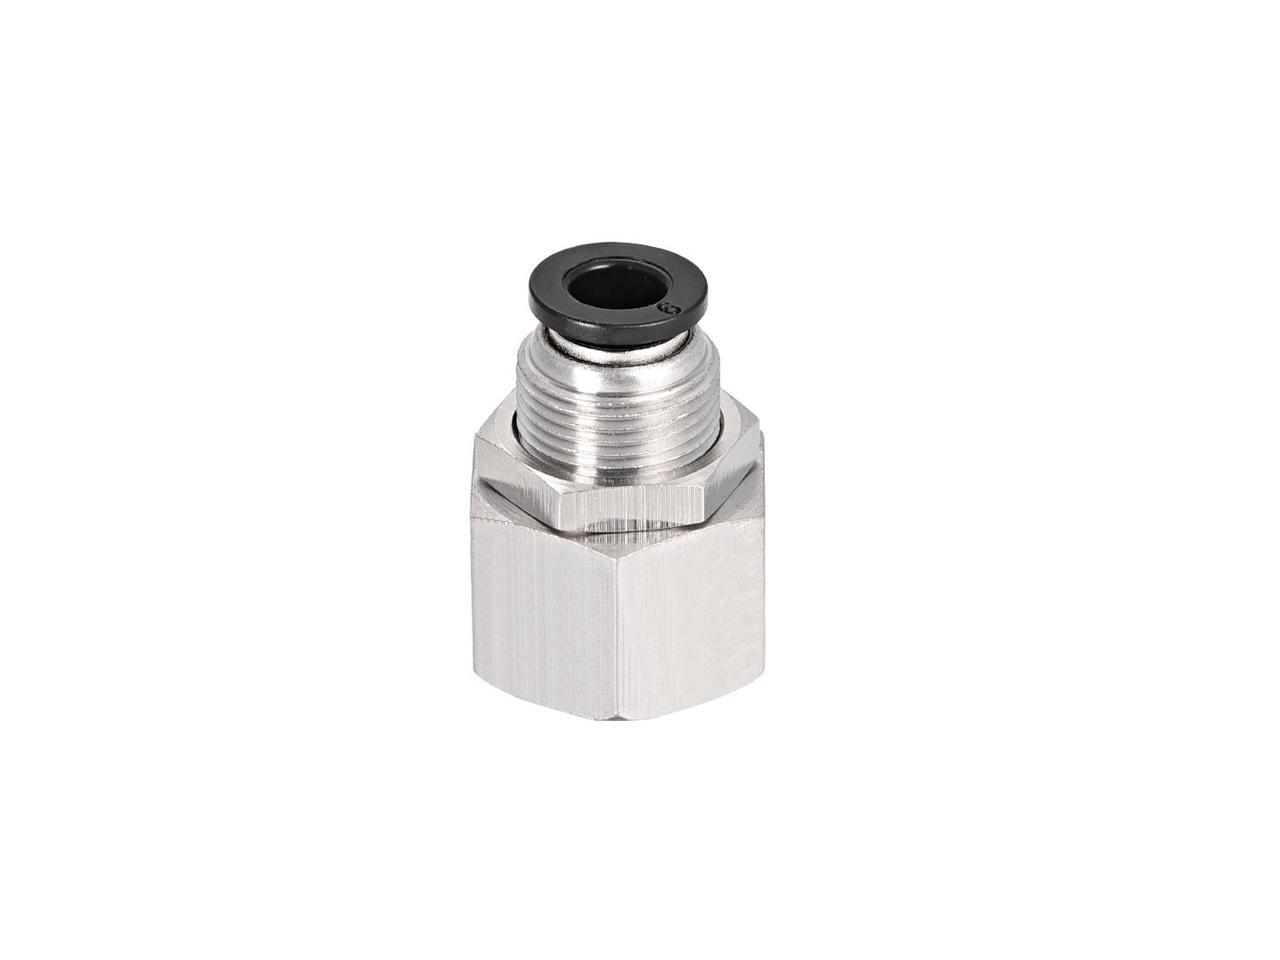 Bulkhead Union Air Fittings 2pcs Details about   6mm Tube to 3/8 BSPT Push Lock Fitting 